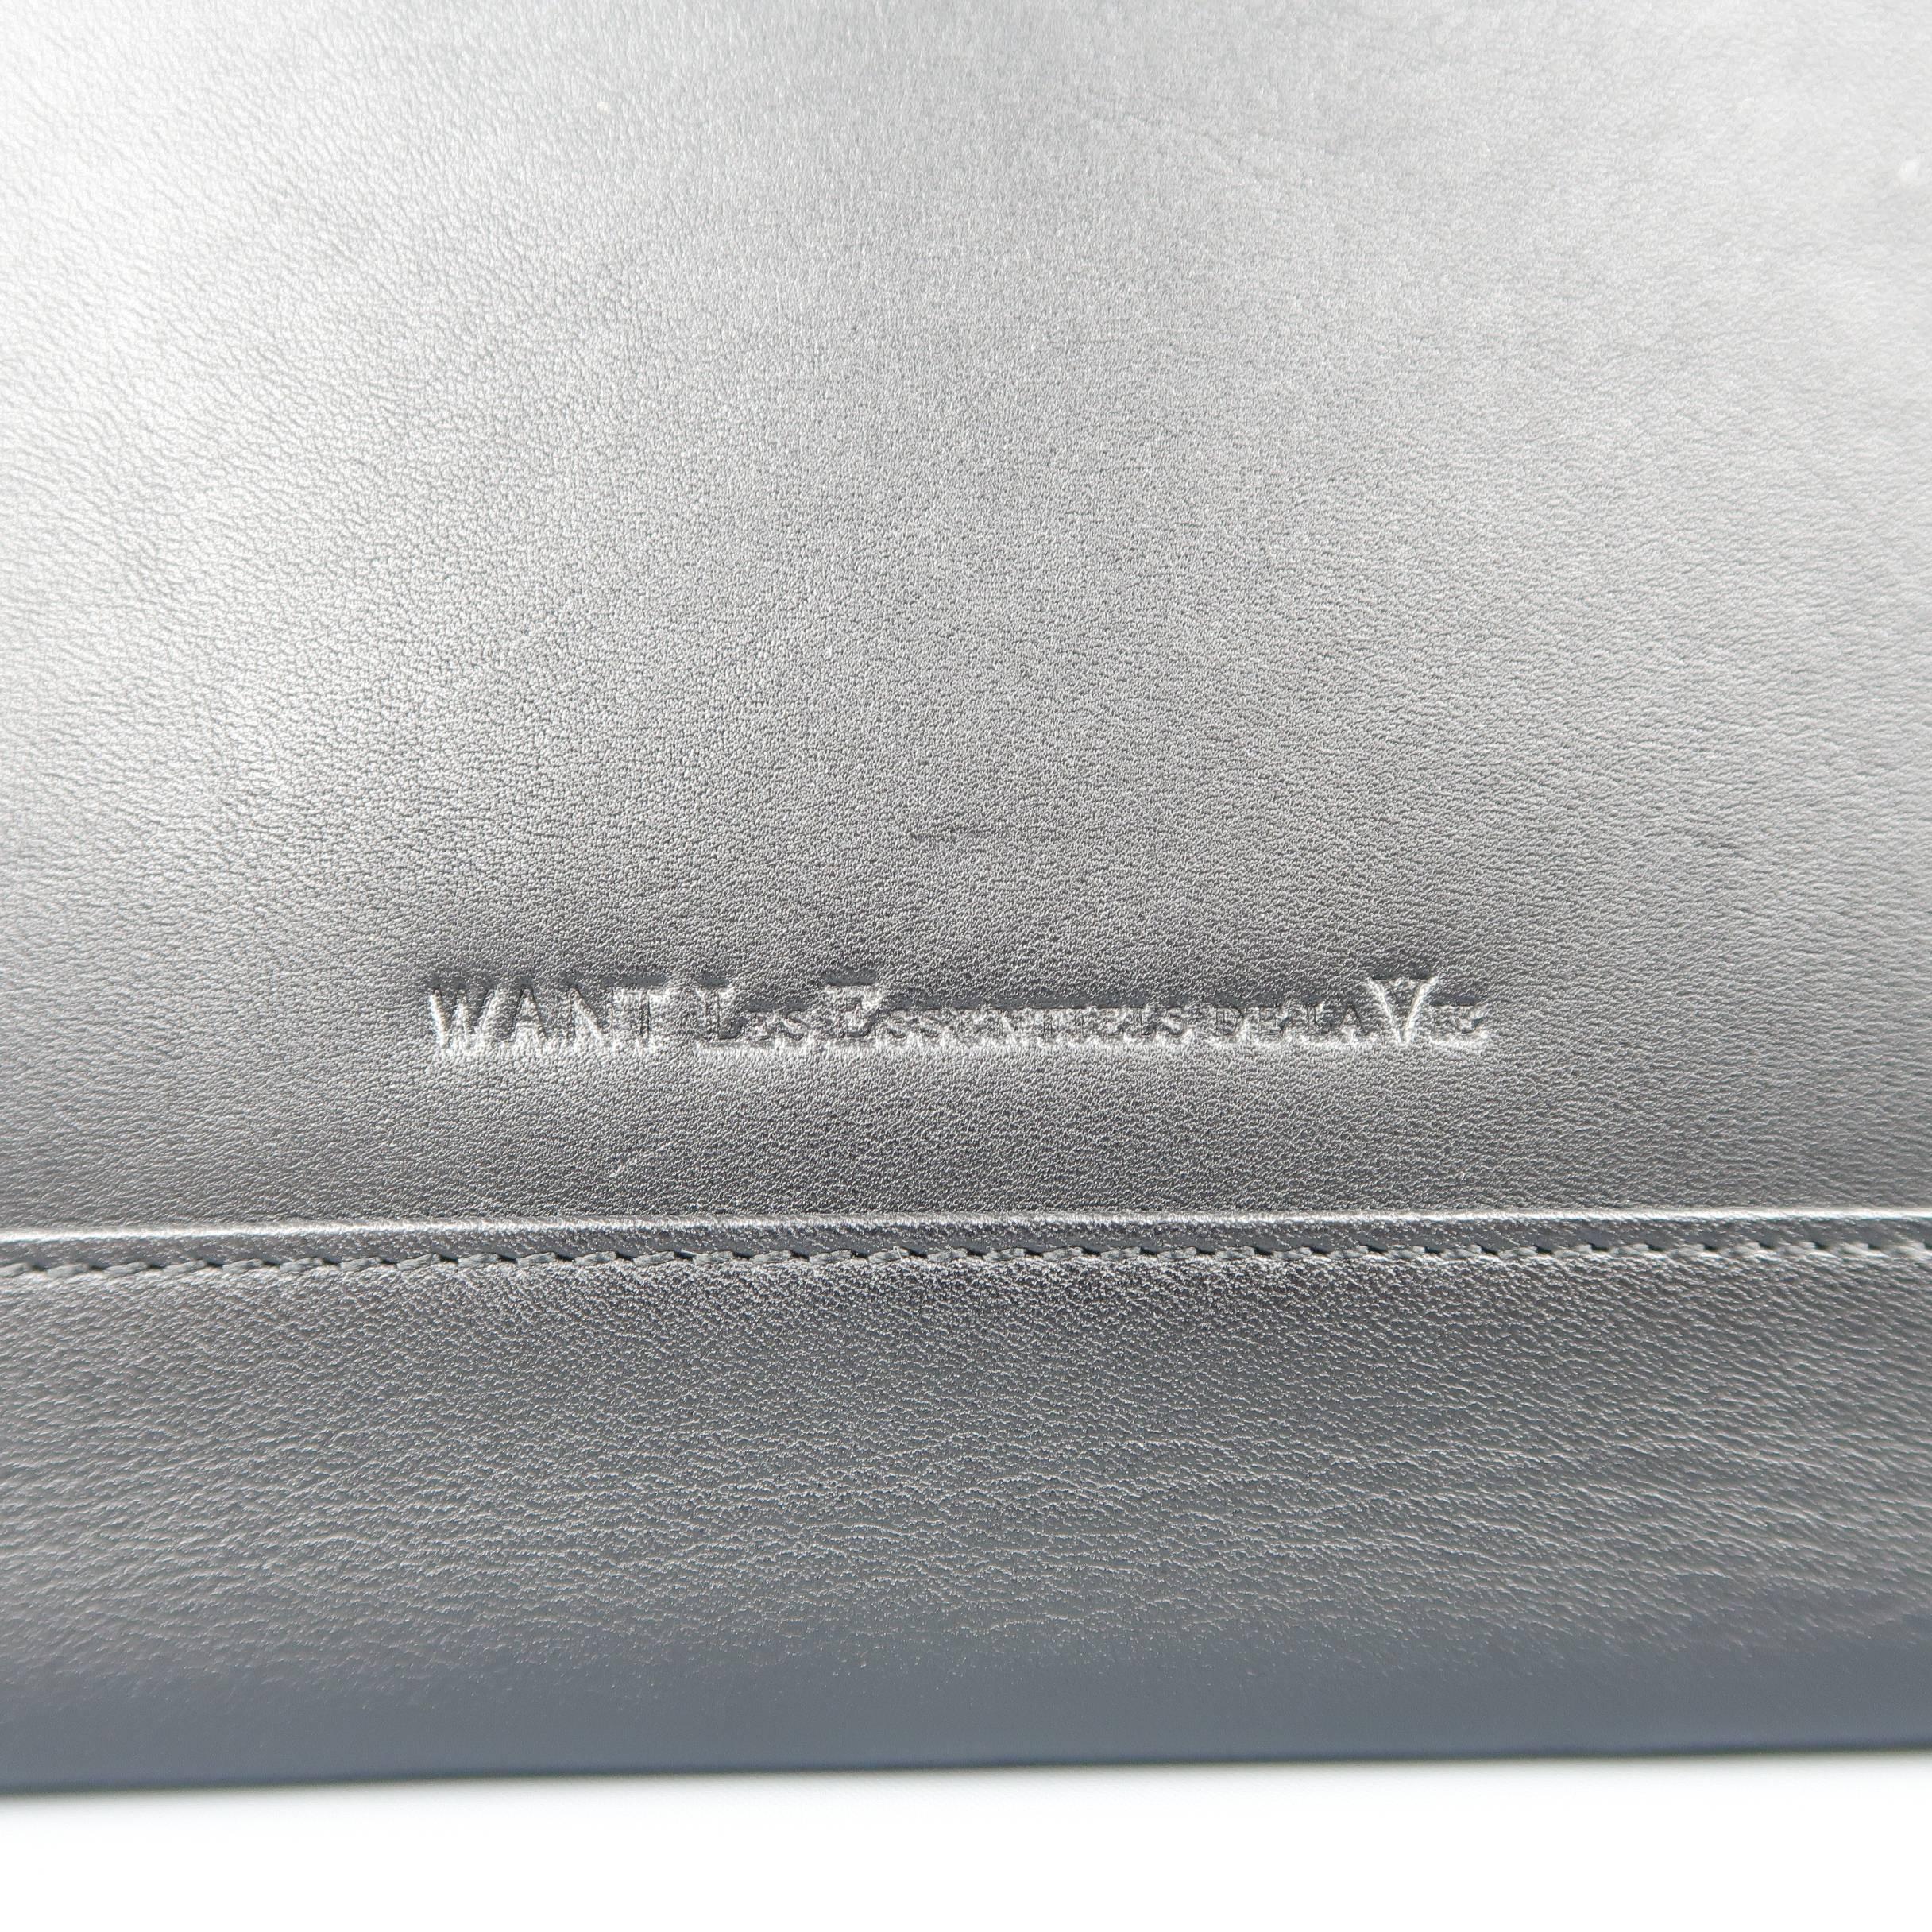 WANT by LES ESSENTIELS DE LA VIE ipad tablet case comes in black leather with a gold tone zip closure and rust interior. Wear throughout.
 
Fair Pre-Owned Condition.
 
Measurements:
 
Length: 10 in.
Width: 0.5 in.
Height: 8.5 in.
